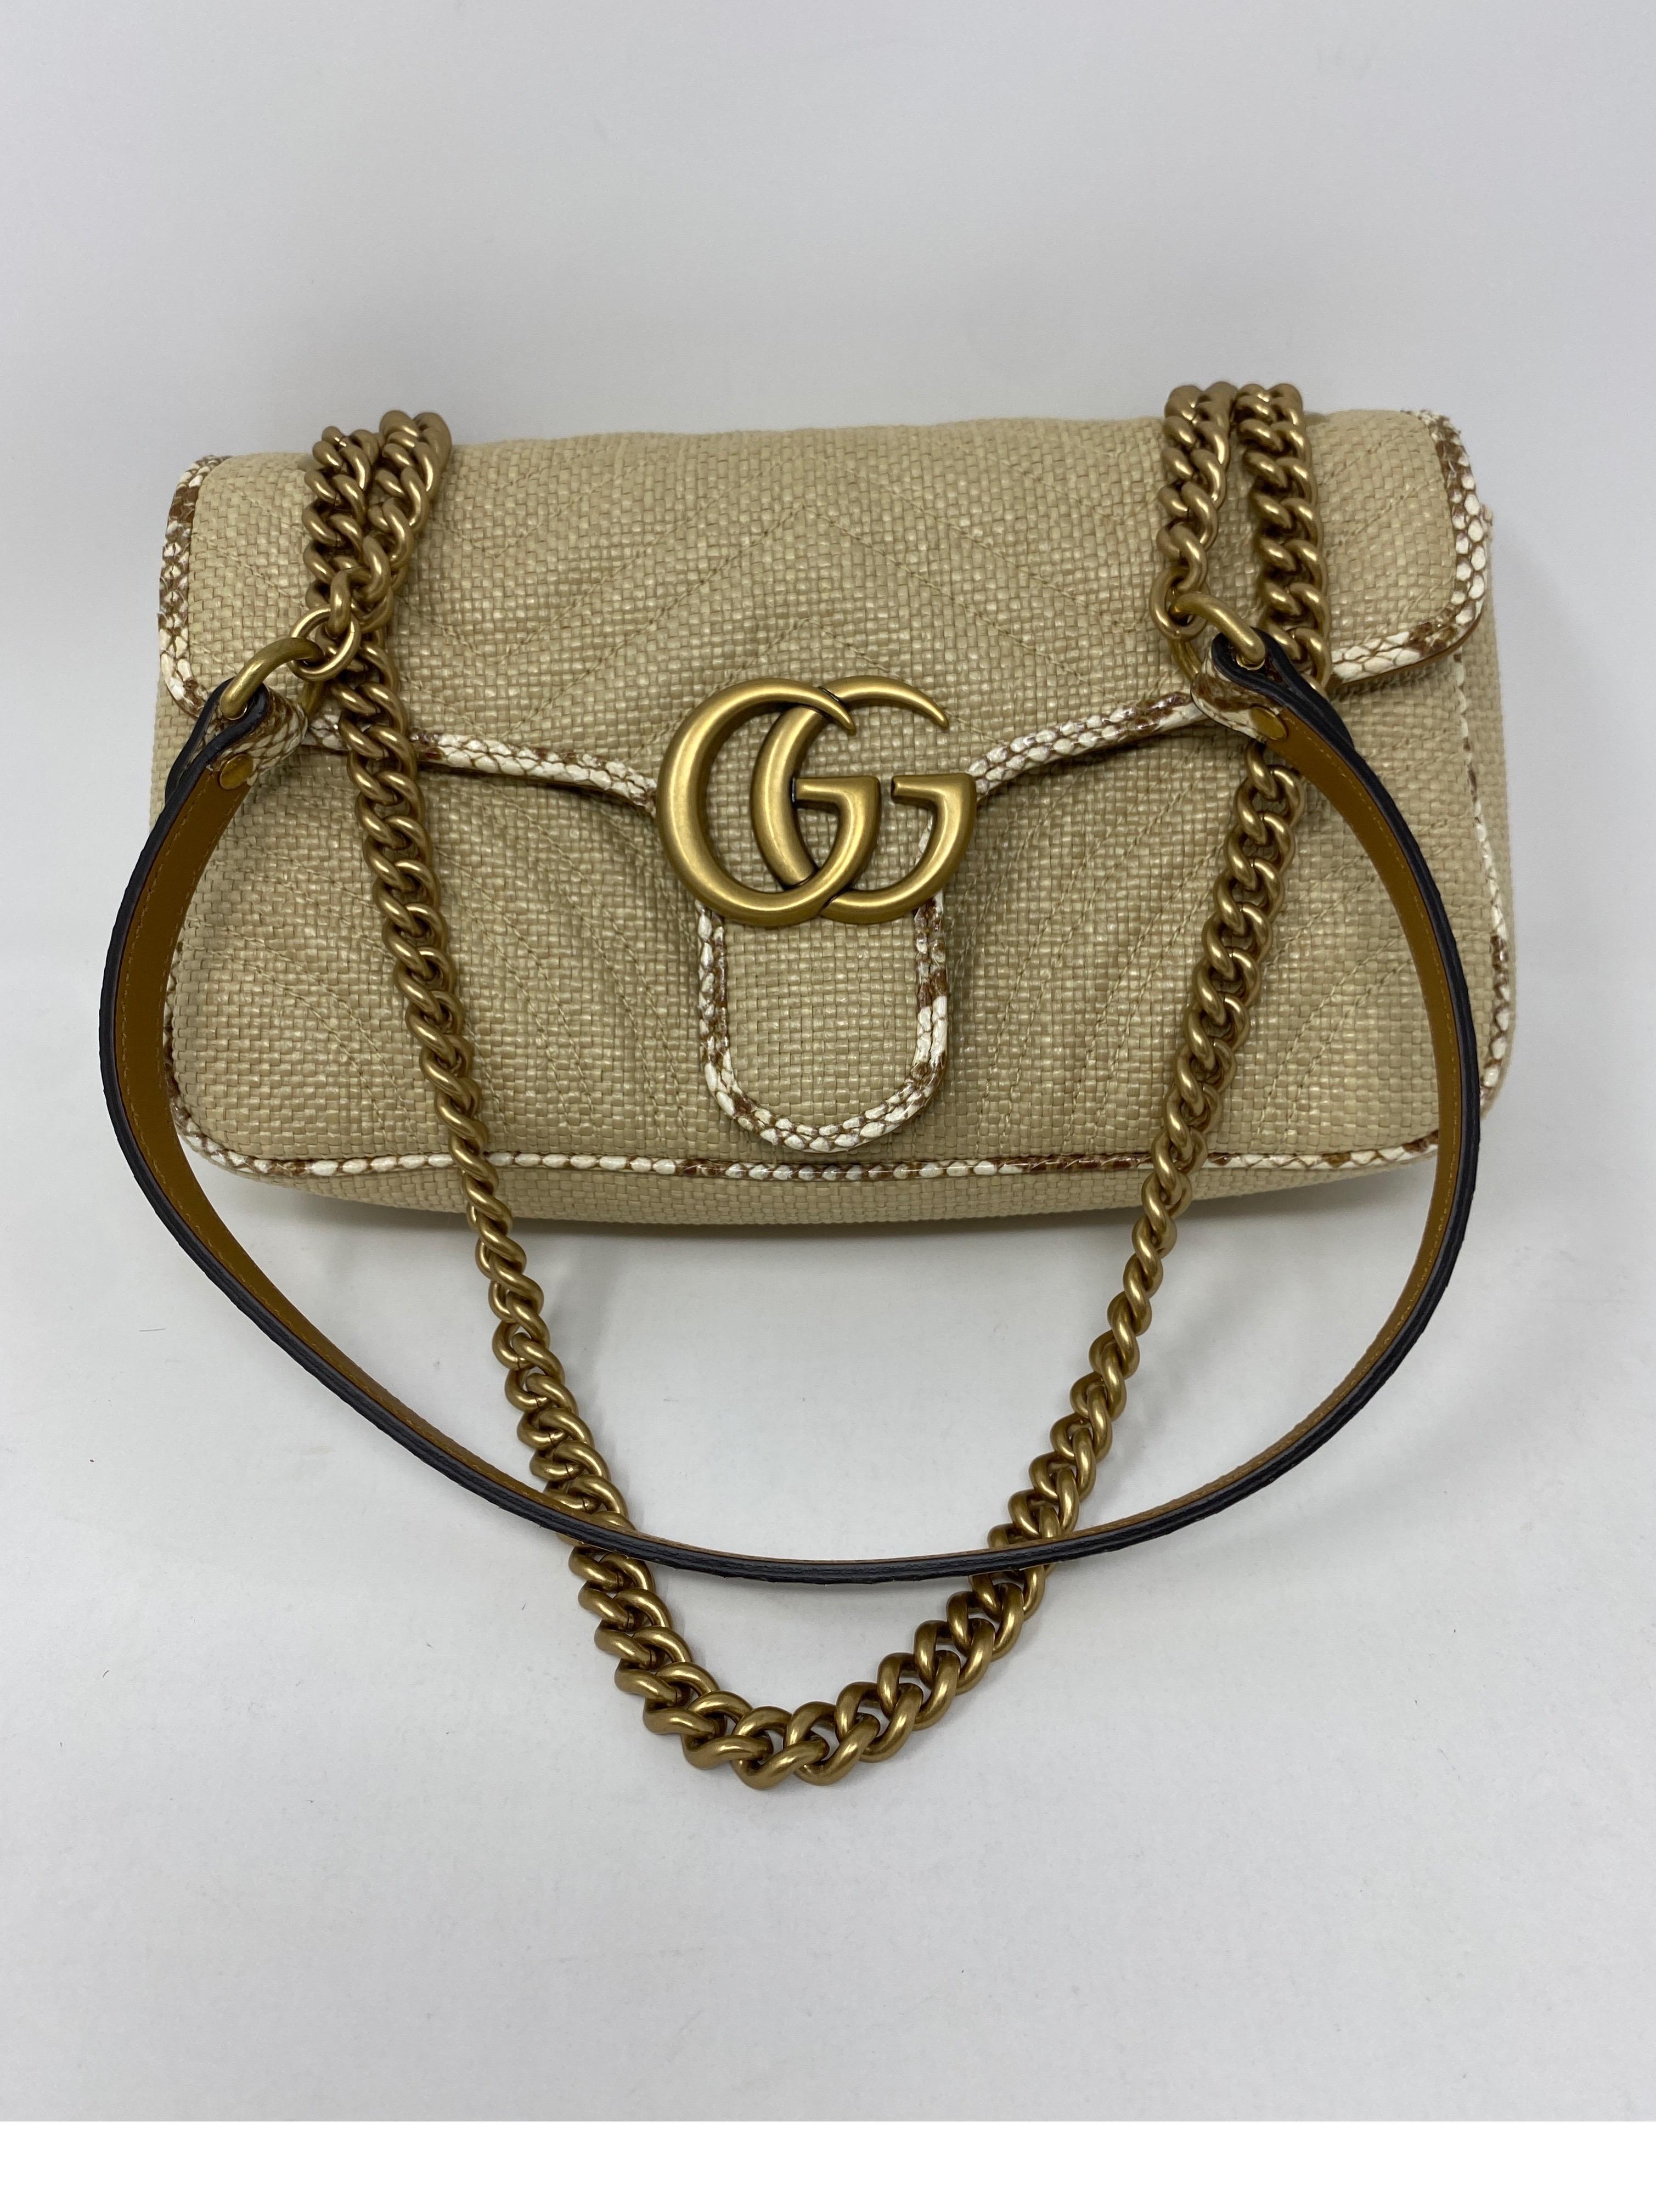 Gucci Small Marmont Straw Bag. Python style leather trim. Mint like new condition. Beautiful bag. Guaranteed  authentic. Dark tan leather interior and floral pattern material. Includes Gucci dust cover. 